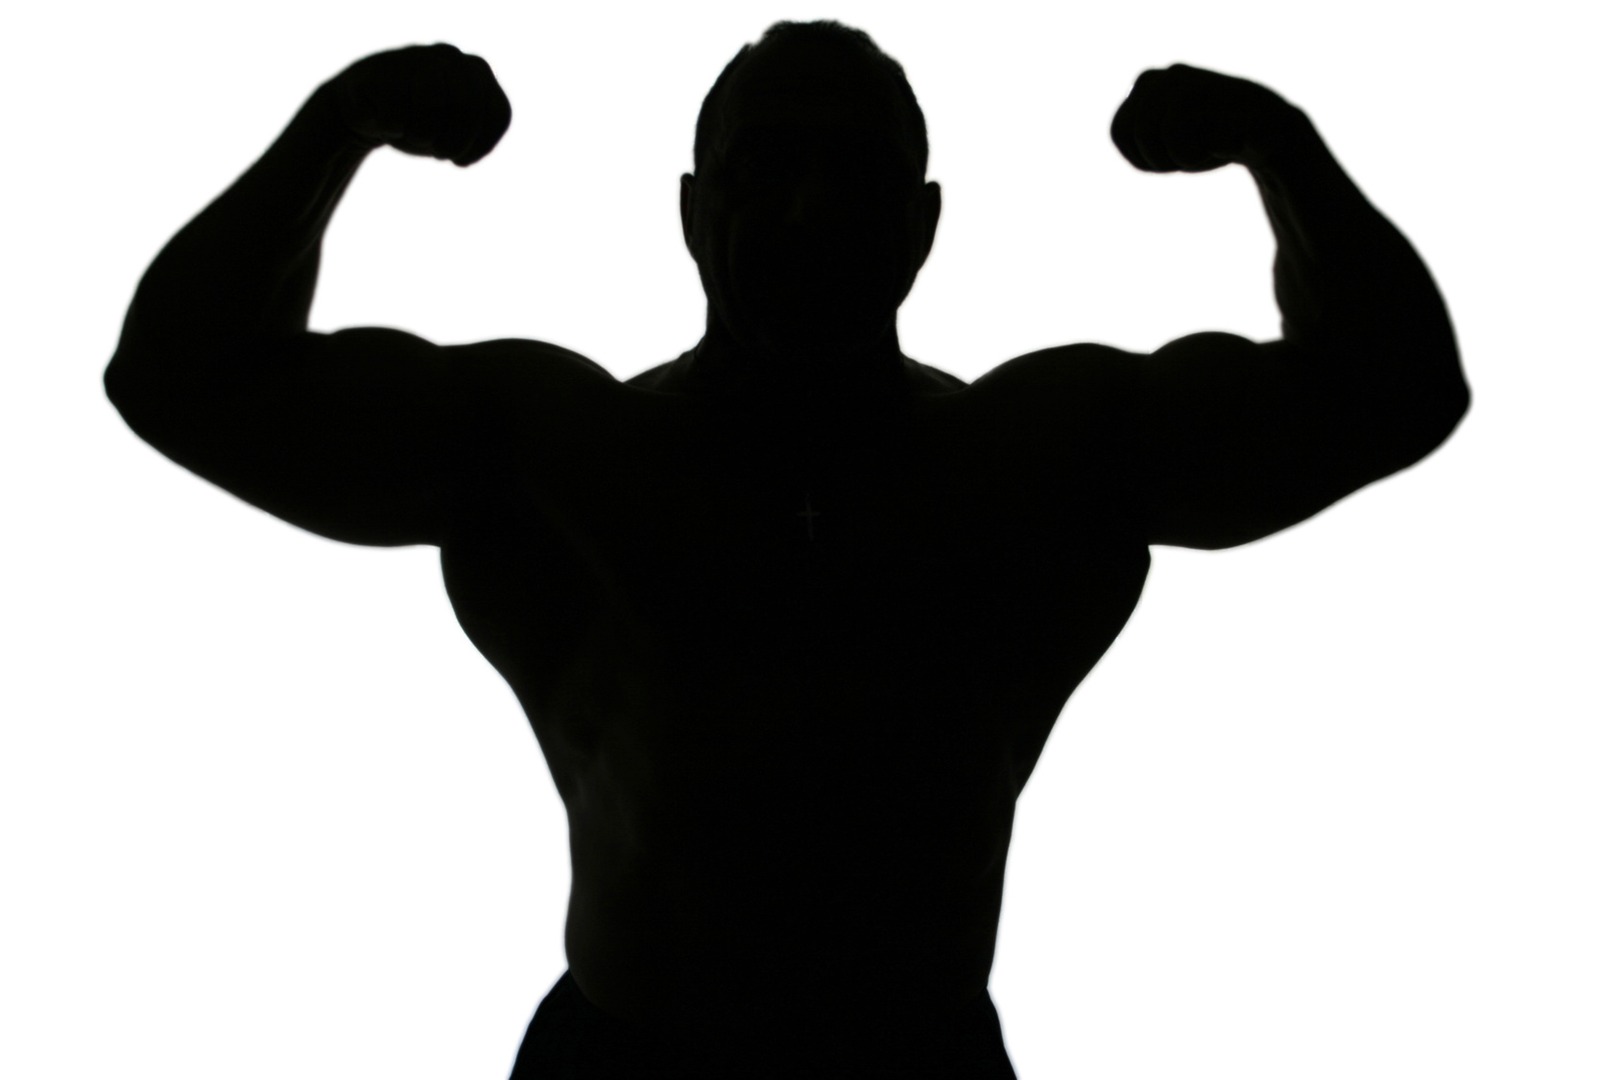 1620x1080 A Body Builder Silhouette Isolated On White Background Fitness. 